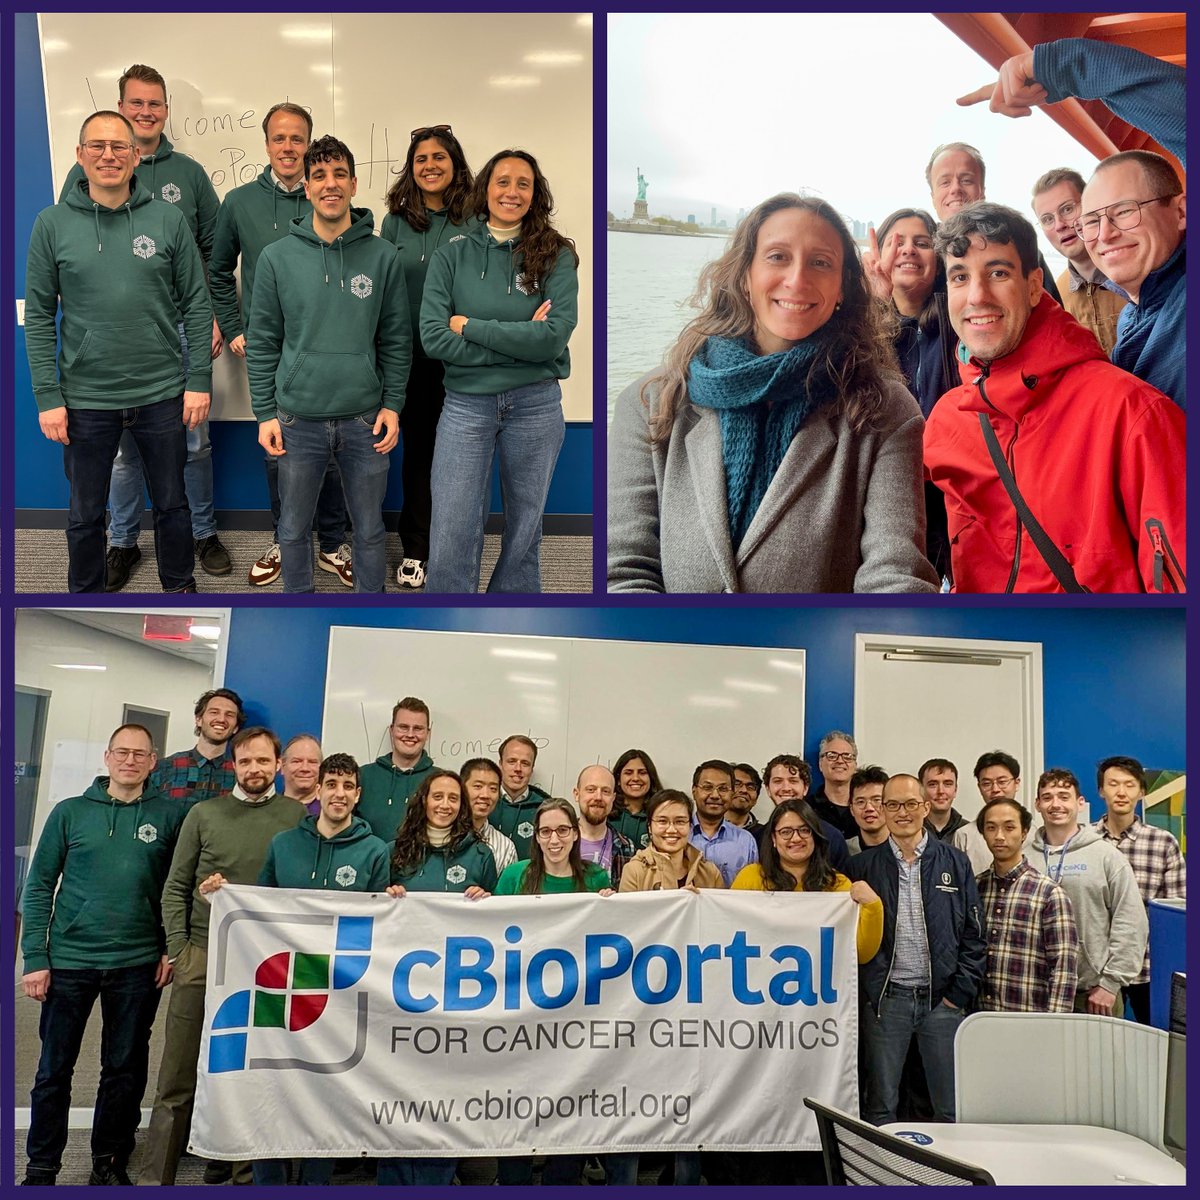 After nearly 8 years, part of the cBioPortal team at The Hyve embarked on an exhilarating journey, joining forces for an in-person hackathon! Stay tuned, as we have some truly exciting plans for the future! Till next time!#cBioPortalHackathon #cBioPortalCommunity #CancerResearch